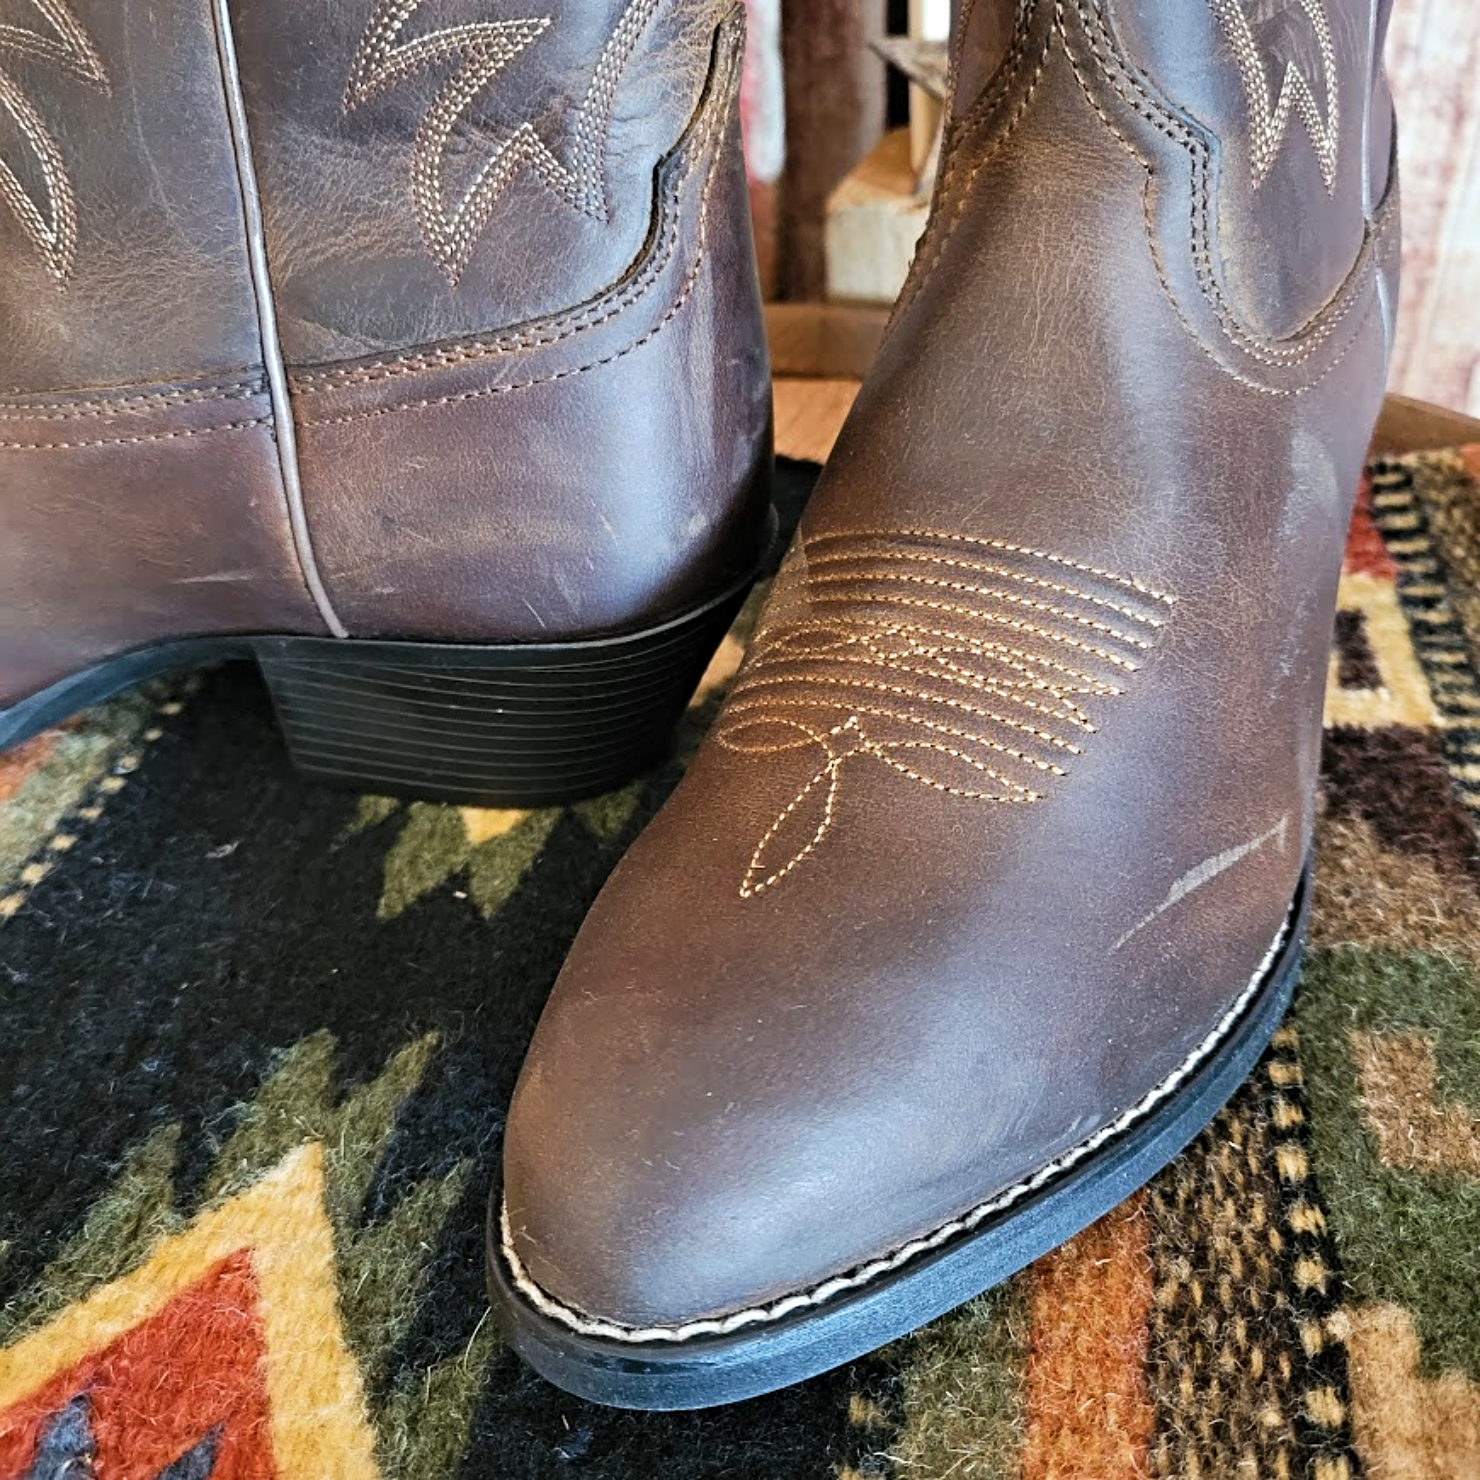 Dress Boots, Heritage Boots